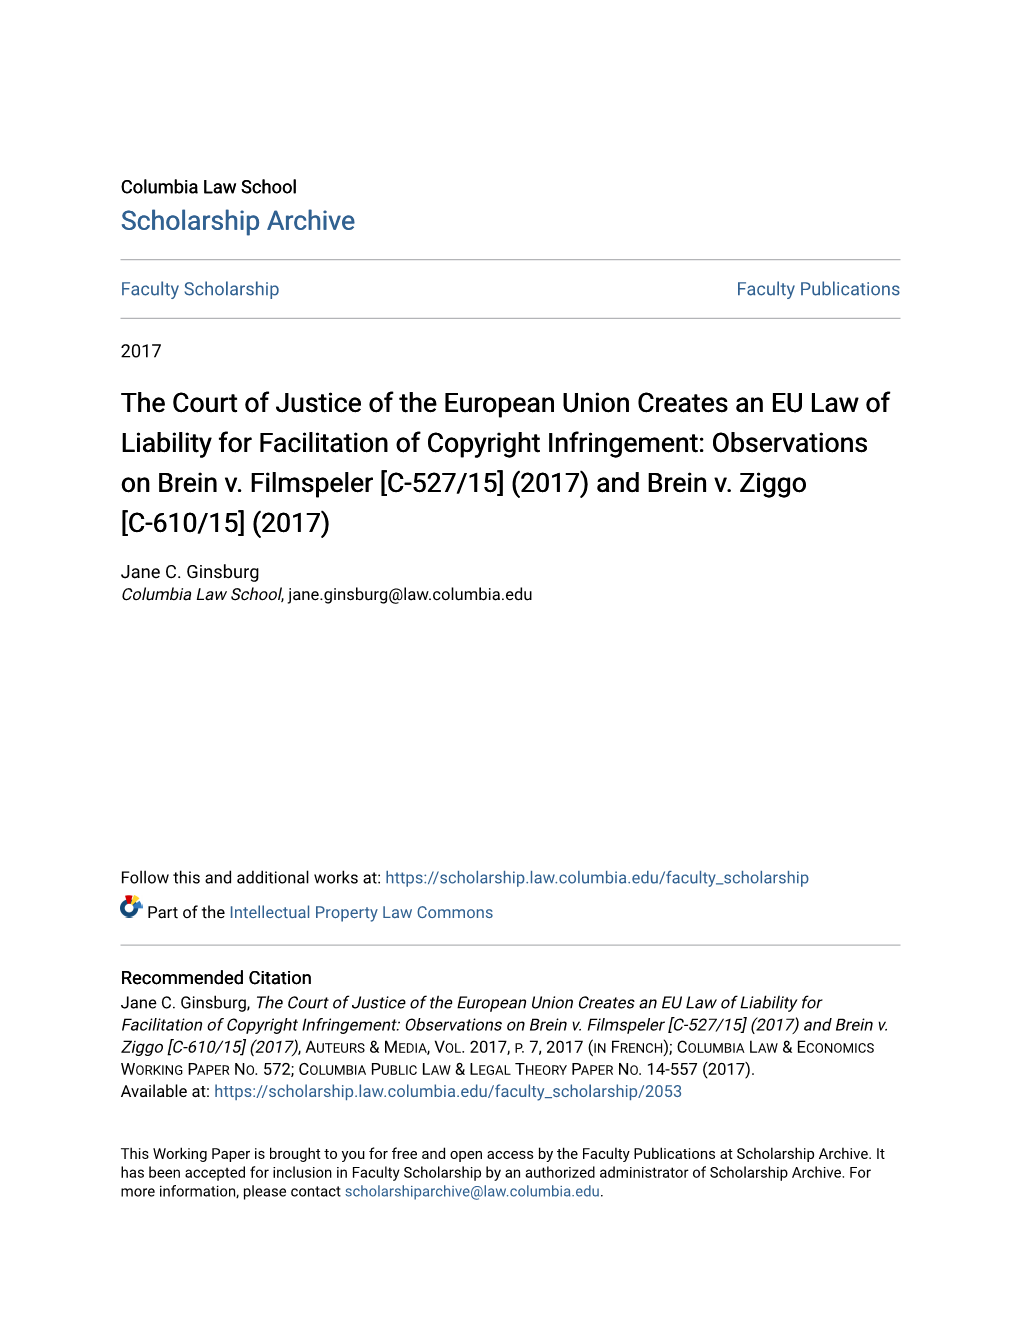 The Court of Justice of the European Union Creates an EU Law of Liability for Facilitation of Copyright Infringement: Observations on Brein V